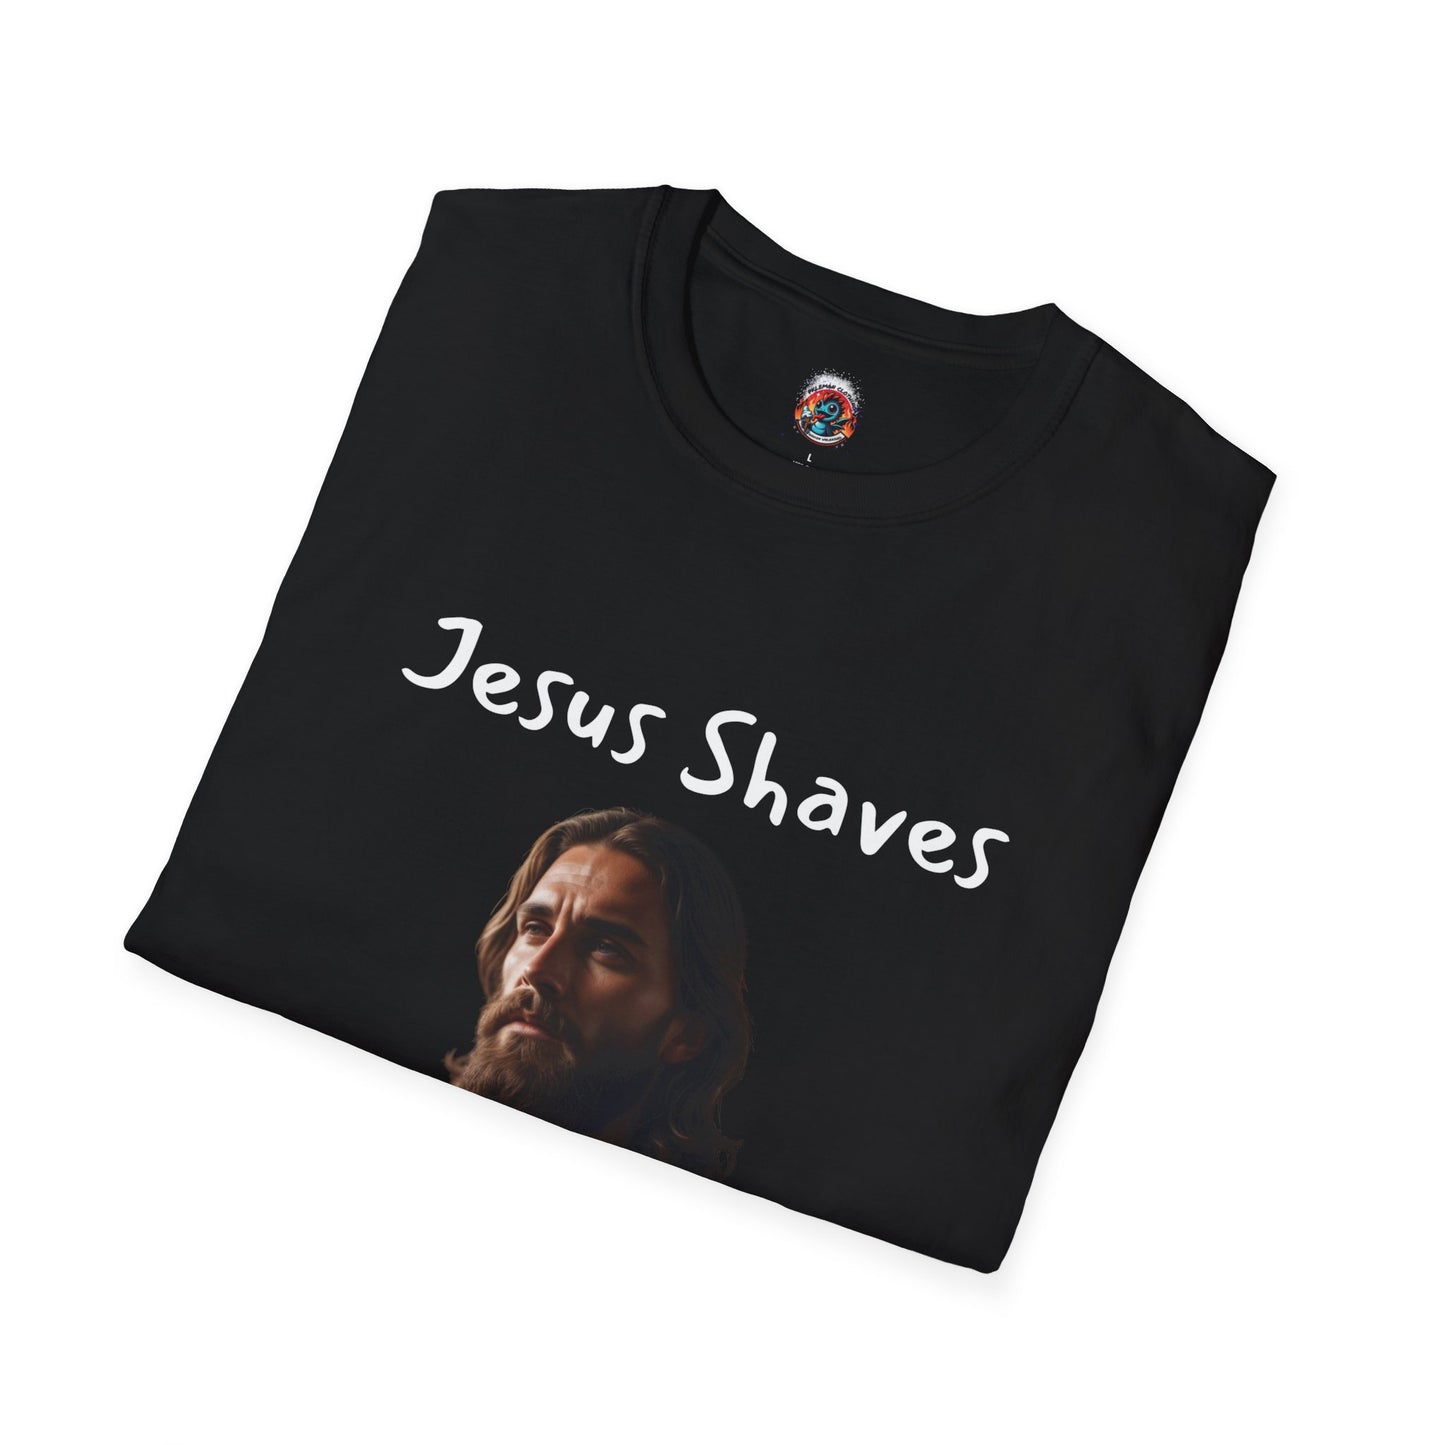 Jesus Shaves Softstyle T-Shirt